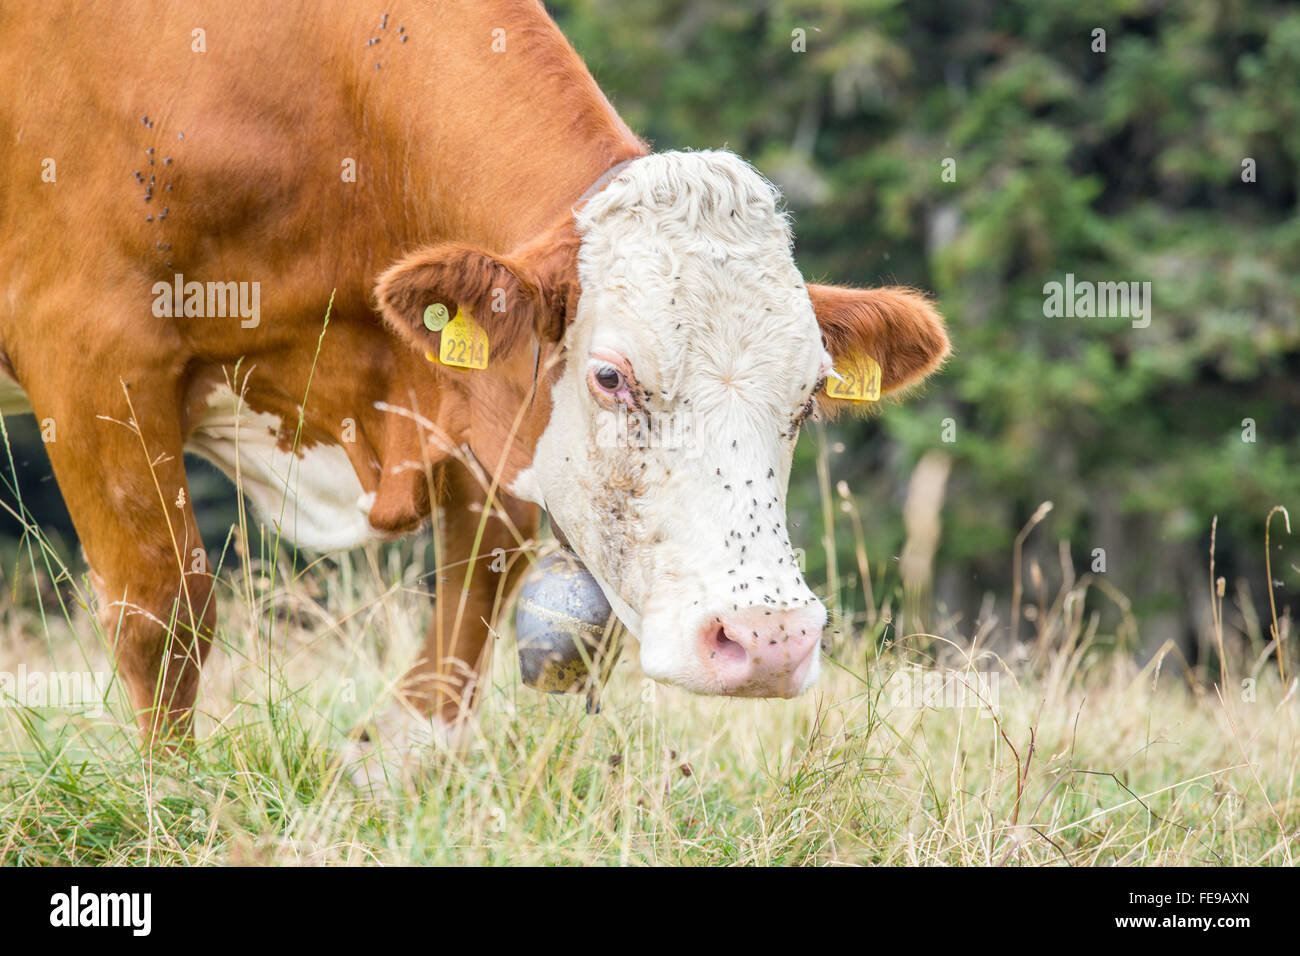 Brown cow with white face grazing on a pasture with trees on the background Stock Photo